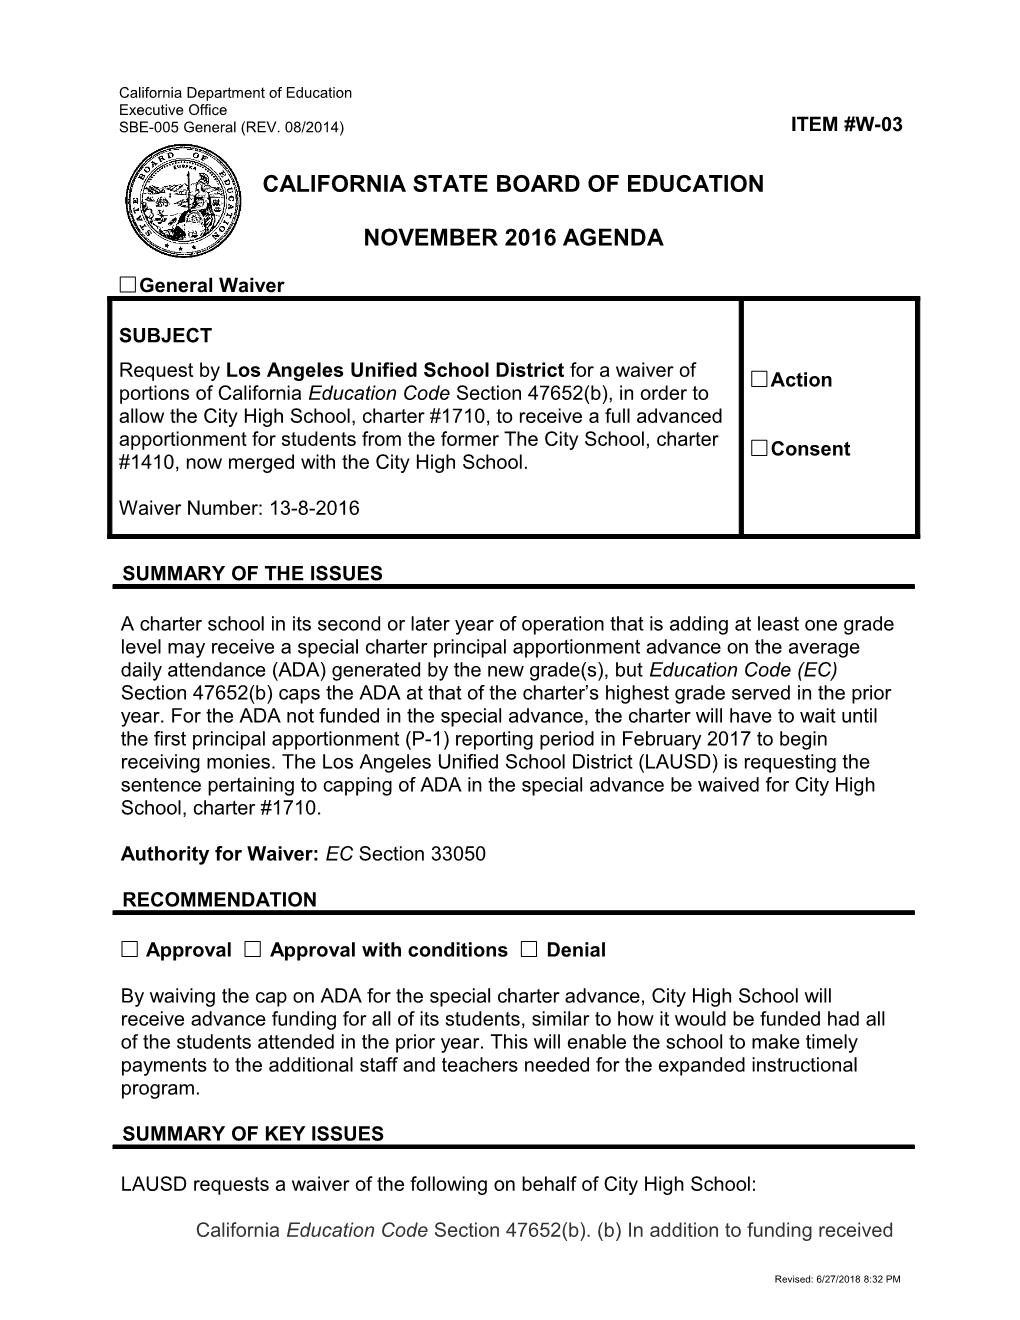 November 2016 Waiver Item W-03 - Meeting Agendas (CA State Board of Education)